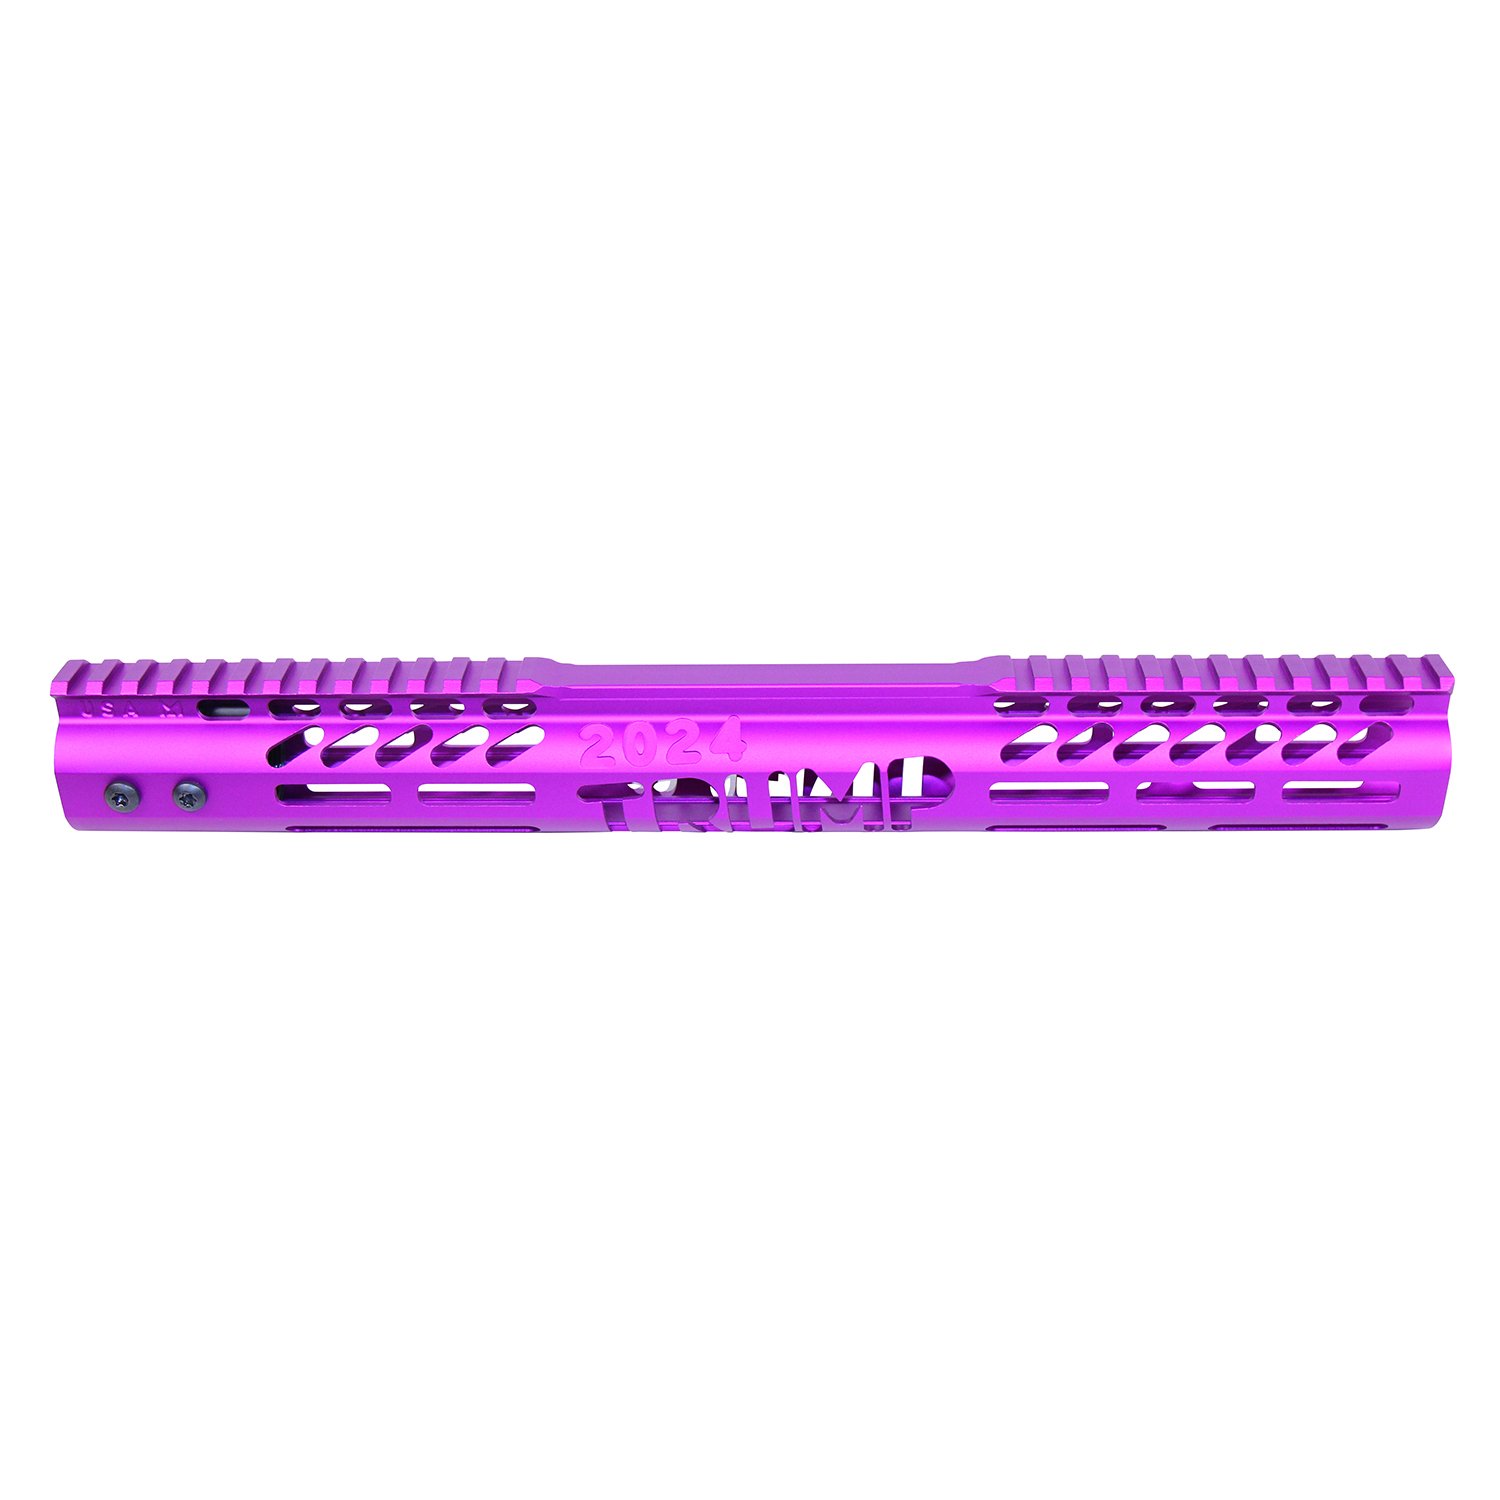 15" "Trump Series" Limited Edition M-LOK System Free Floating Handguard With Monolithic Top Rail (Anodized Purple)